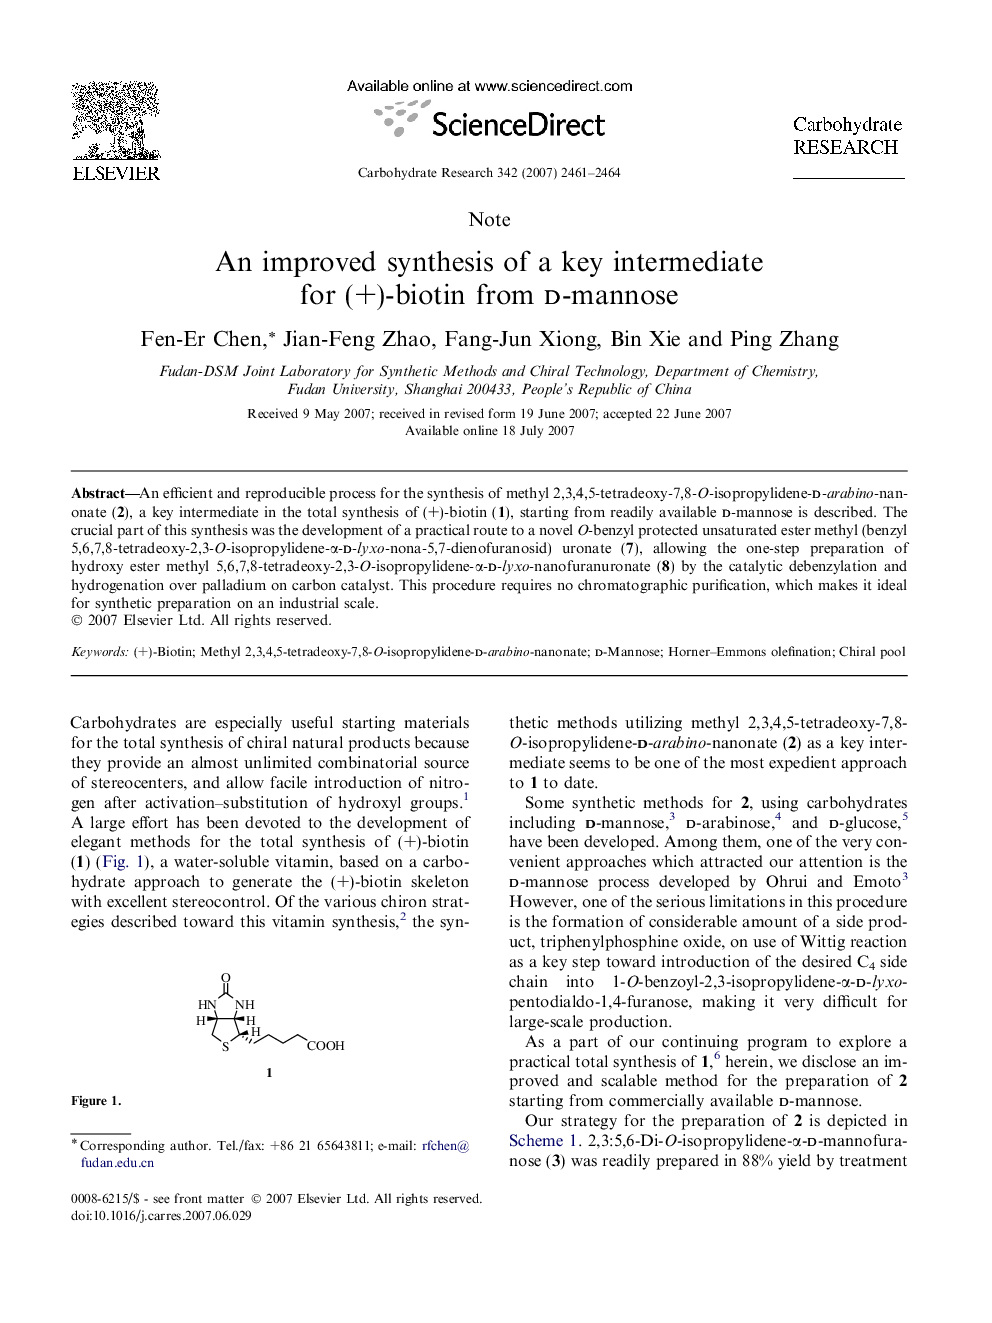 An improved synthesis of a key intermediate for (+)-biotin from d-mannose